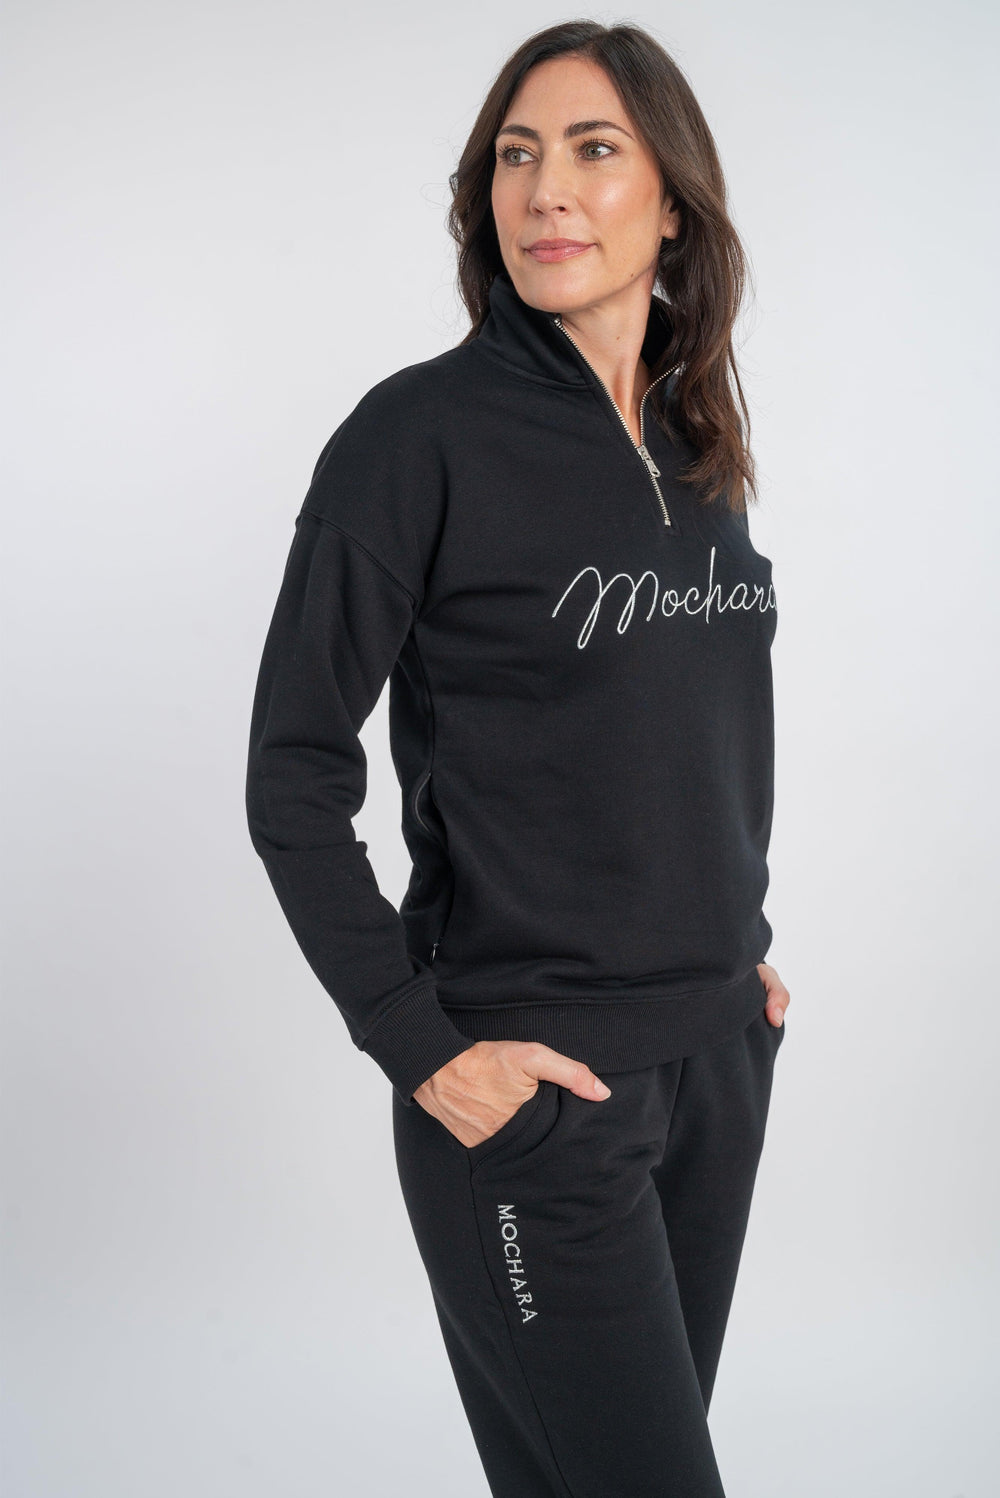 Mochara Joggers in Black Luxe Edition